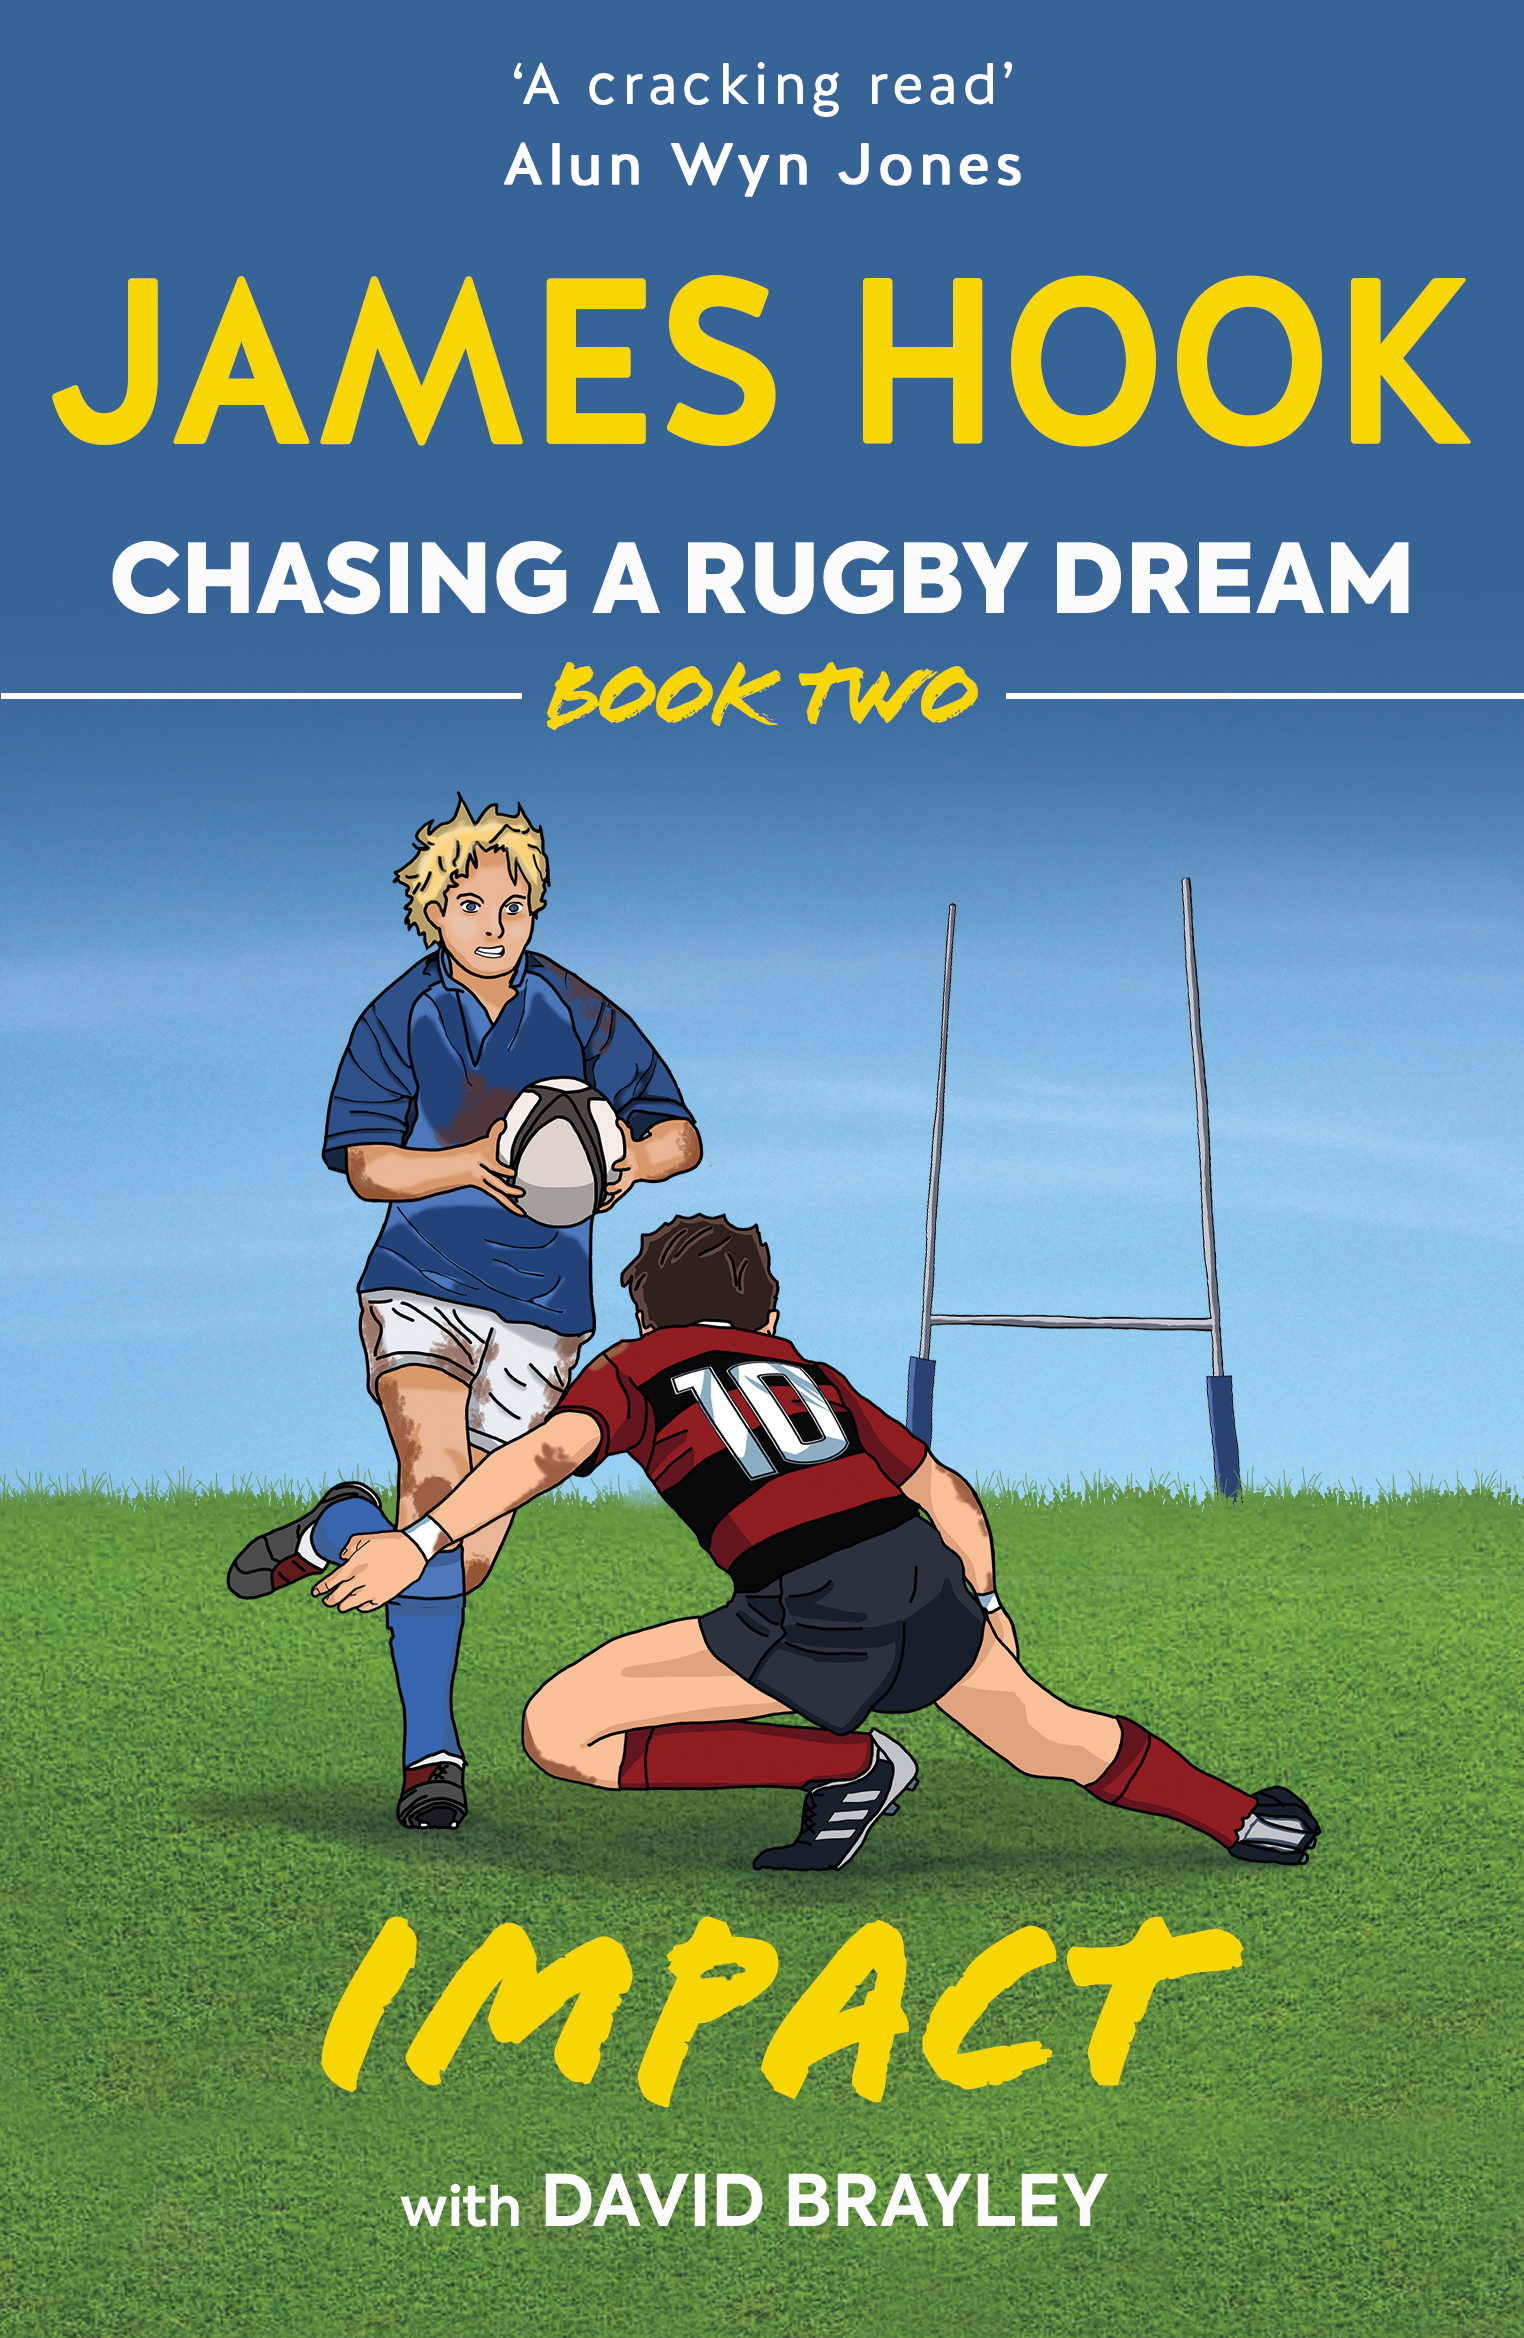 Chasing a Rugby Dream: Book Two